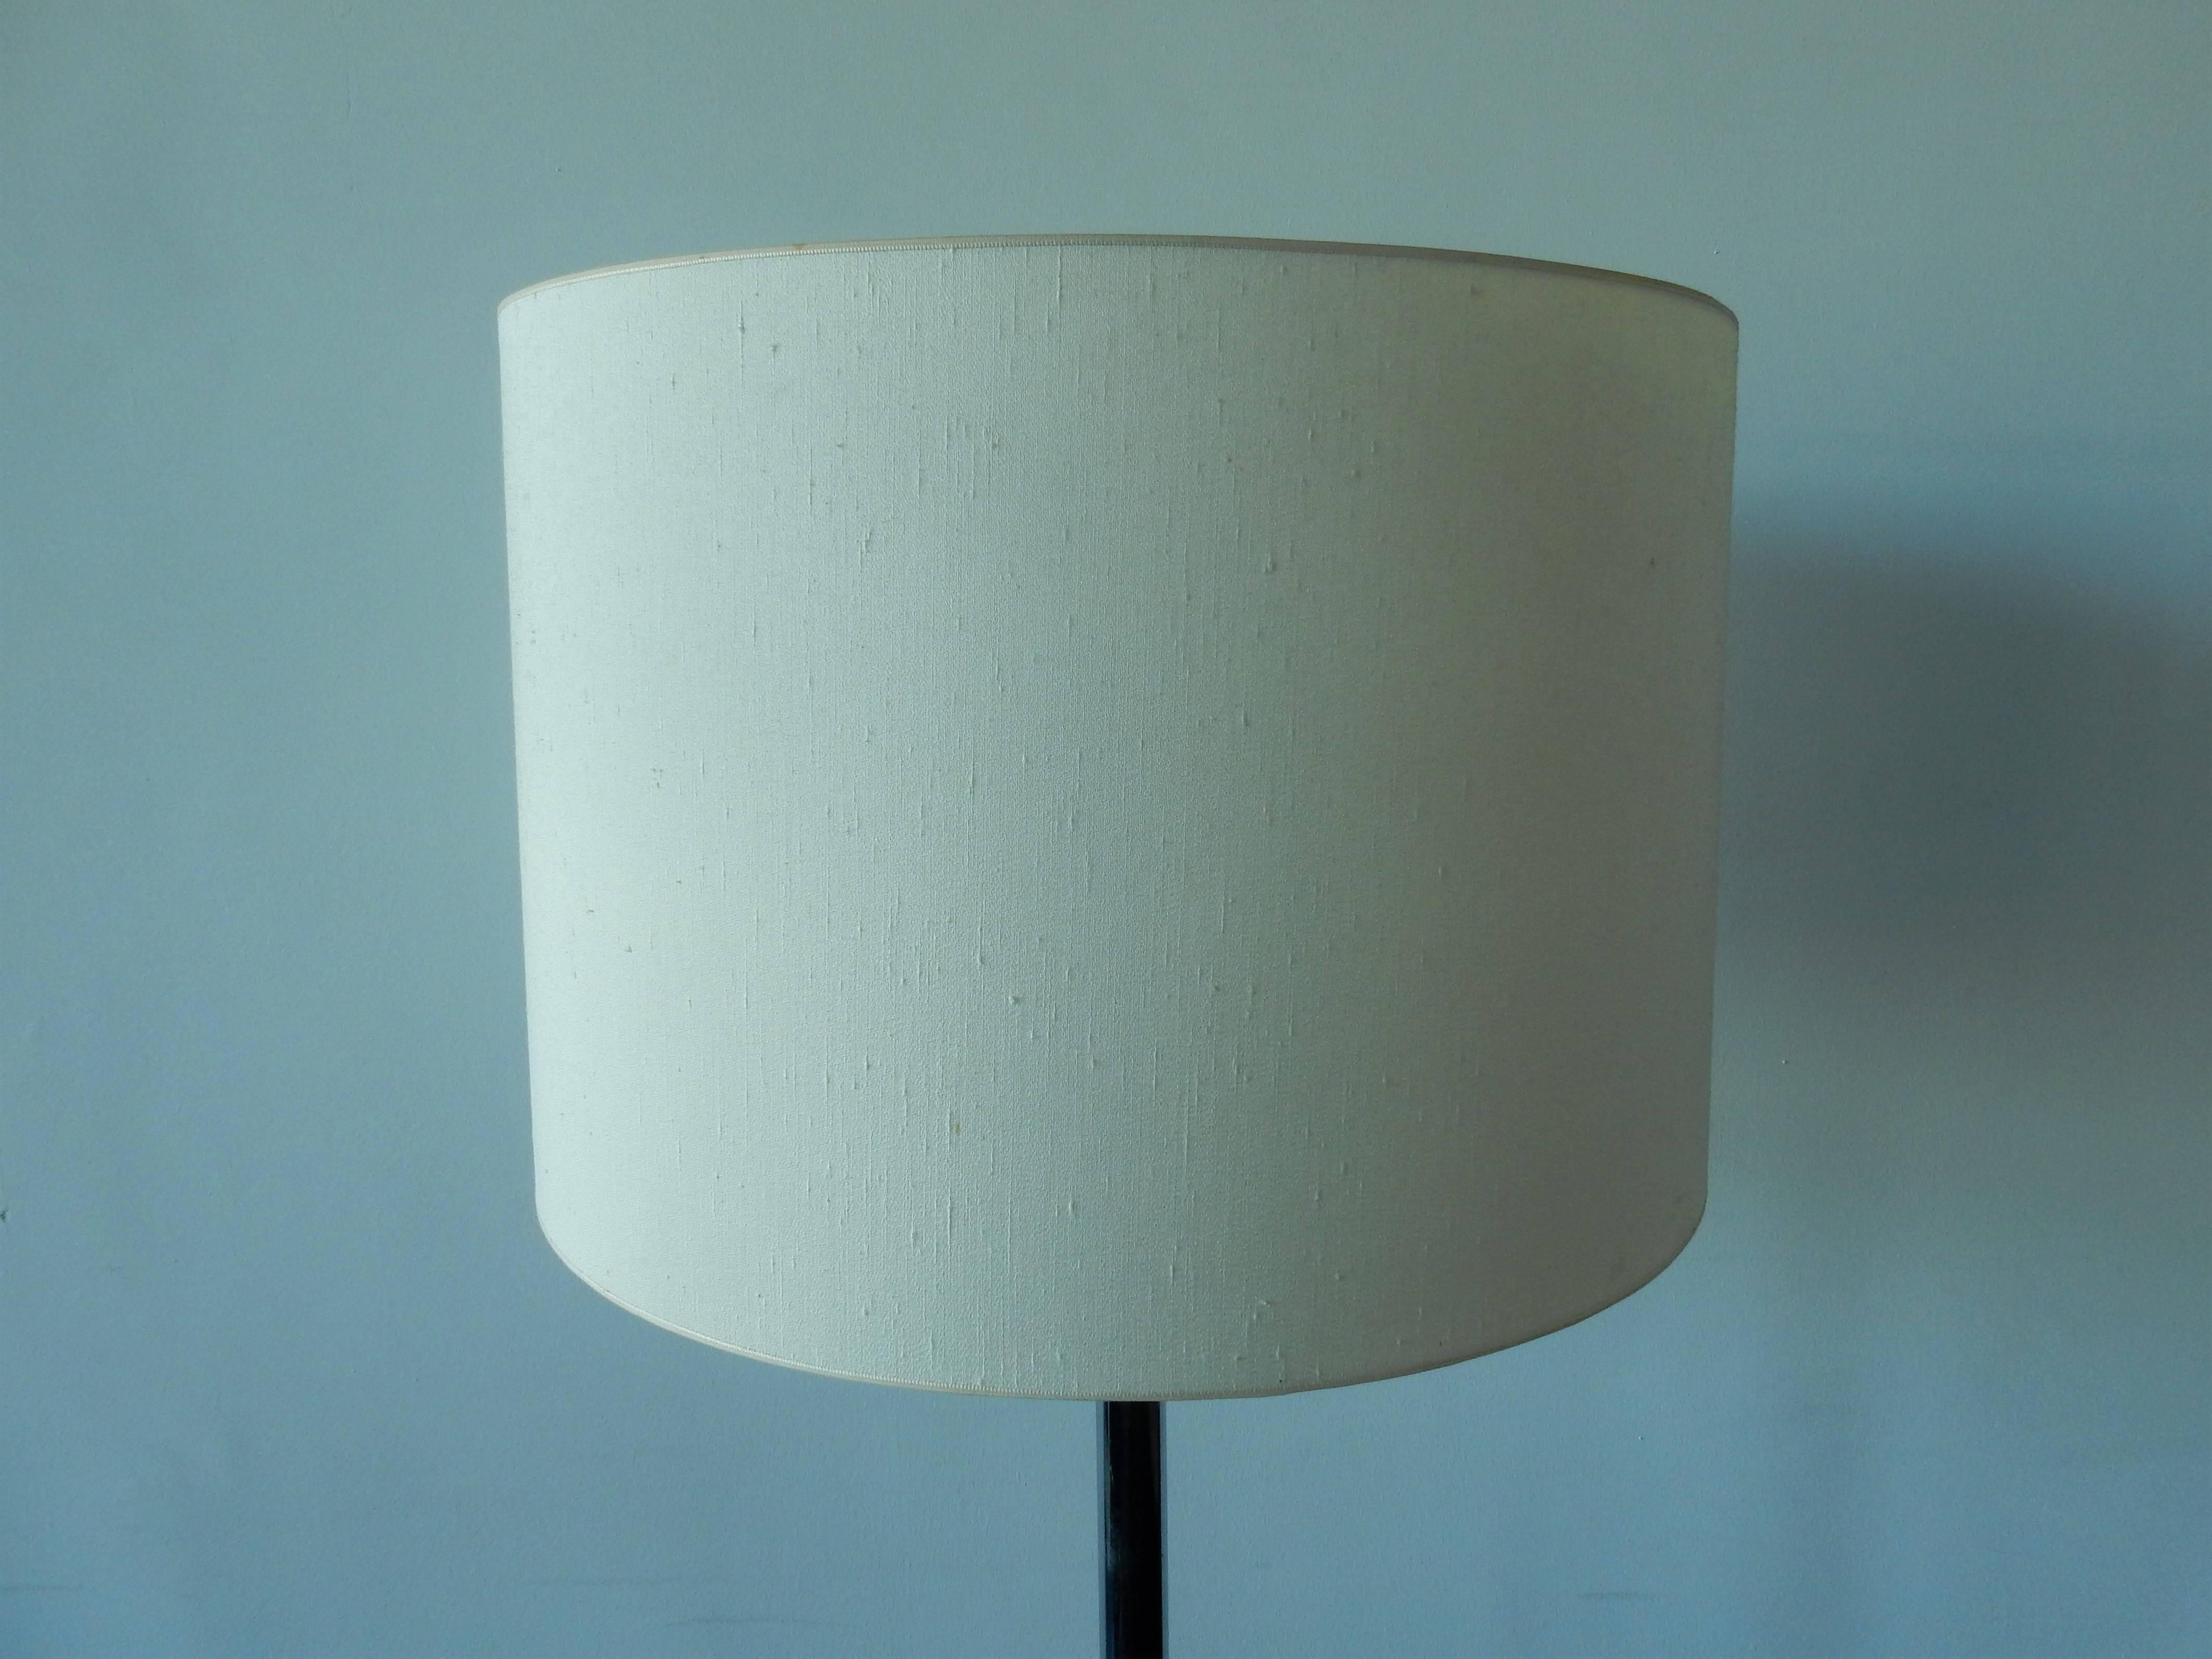 This tall floor lamp, model Shantung or D-2163.14, by RAAK is in a good to very good condition. It has a chromed metal base and his original cream colored Shantung fabric shade.